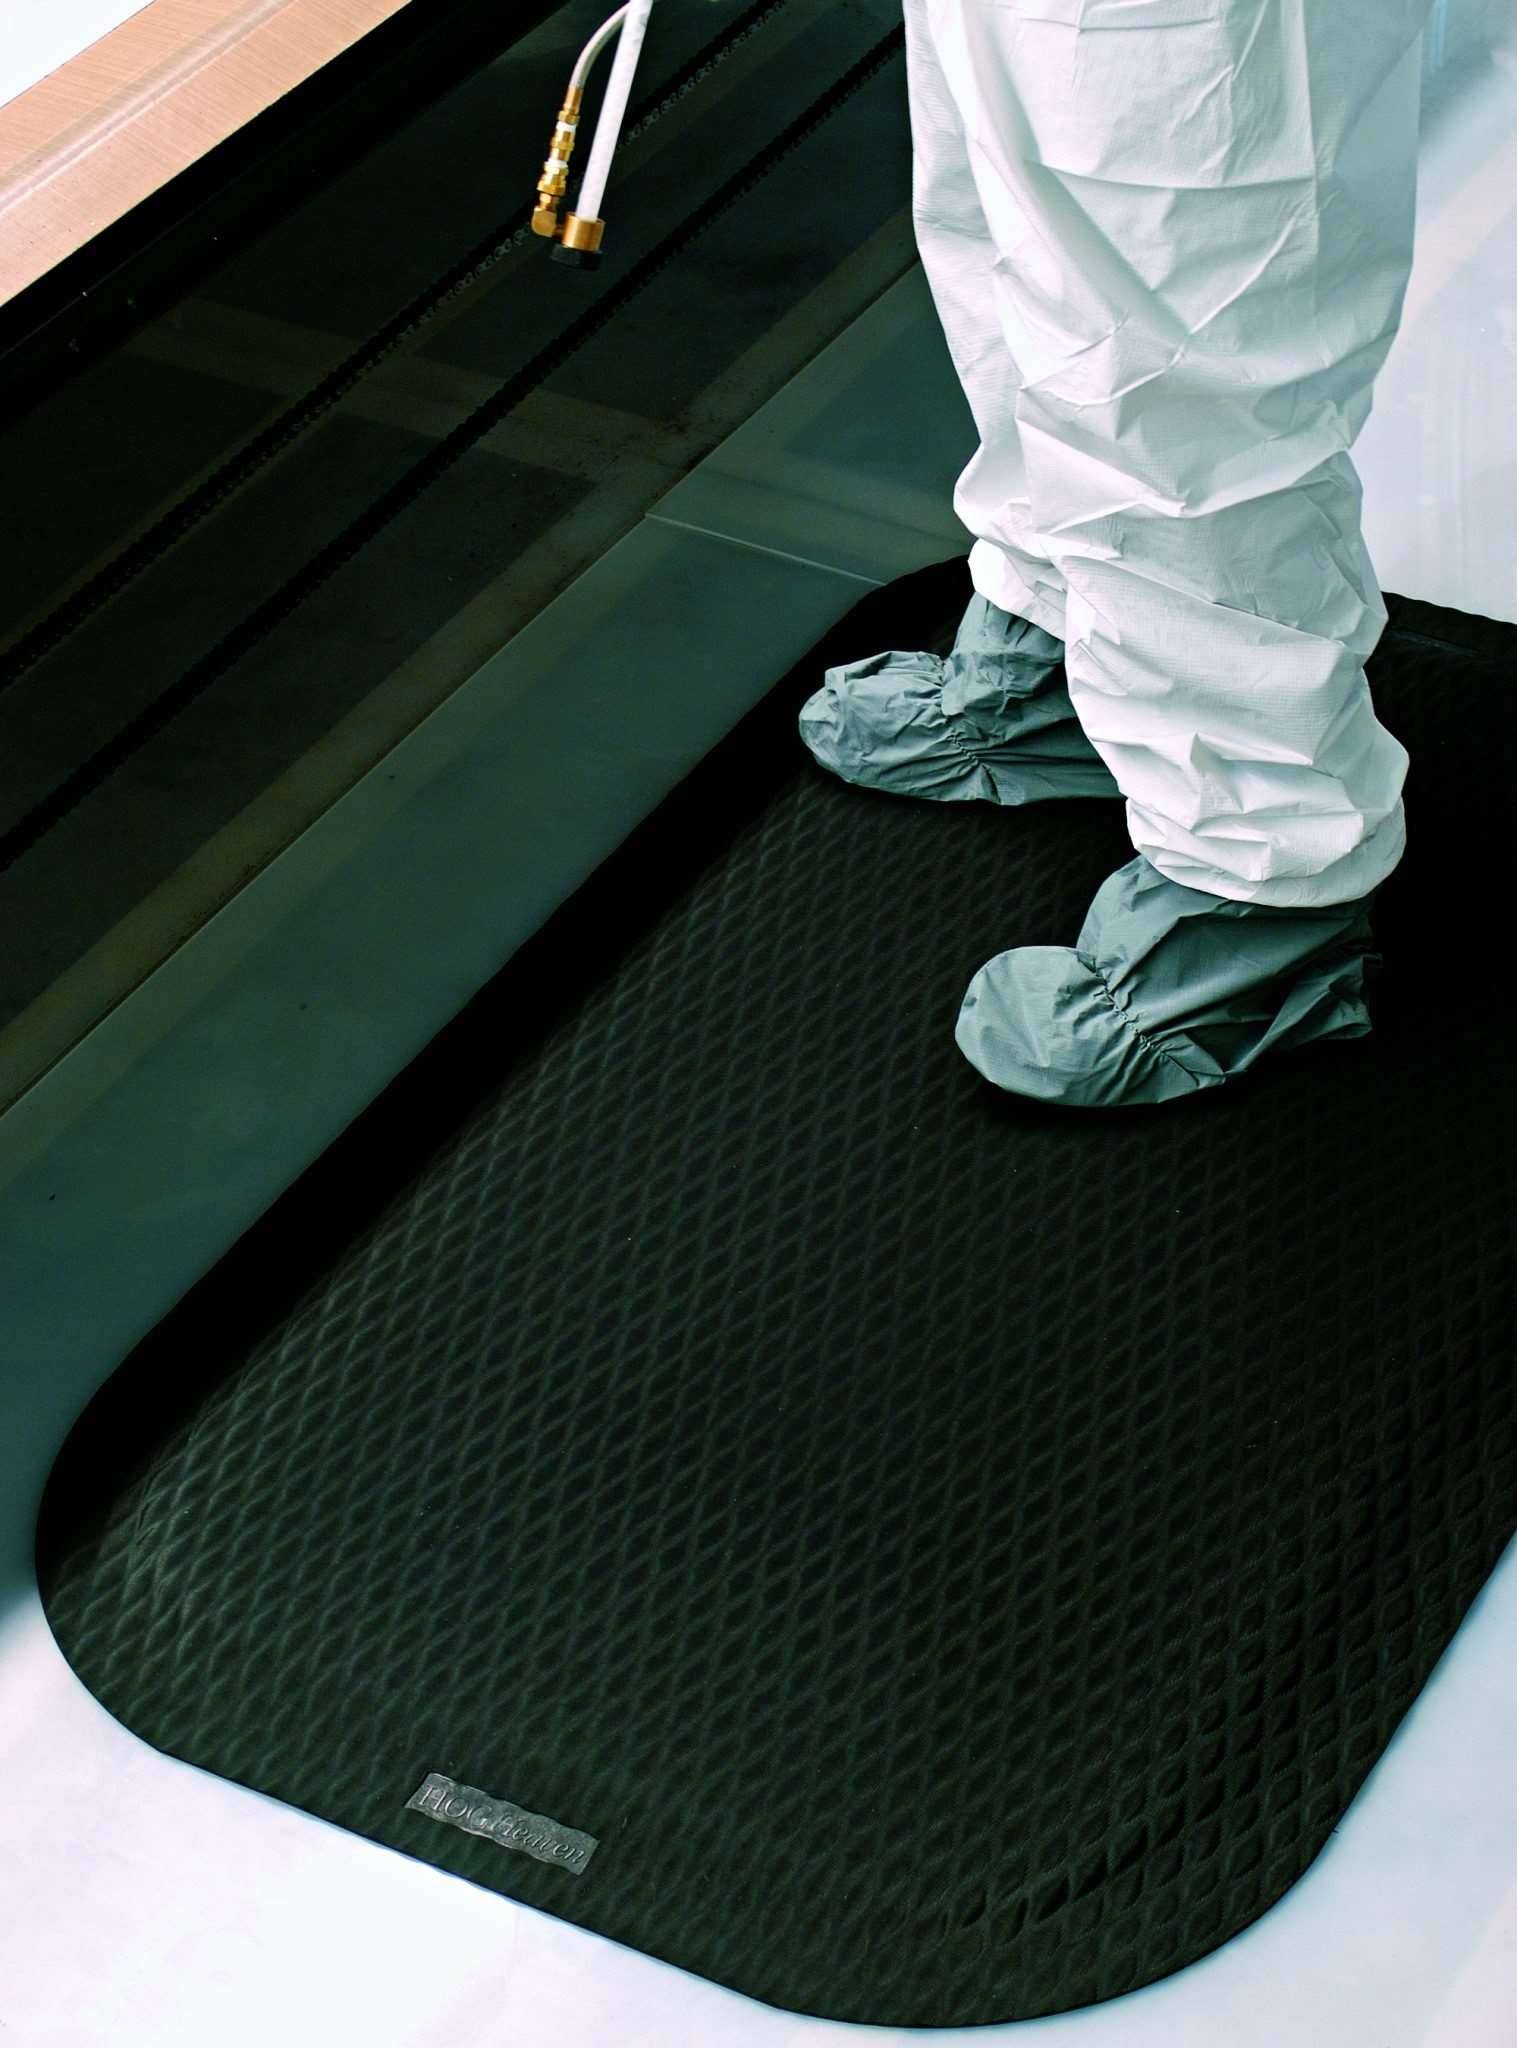 Stand-Ease - 3/8 Nitrile Rubber Kitchen Mat, Wet Area Anti-Fatigue Mats, Anti Fatigue Flooring